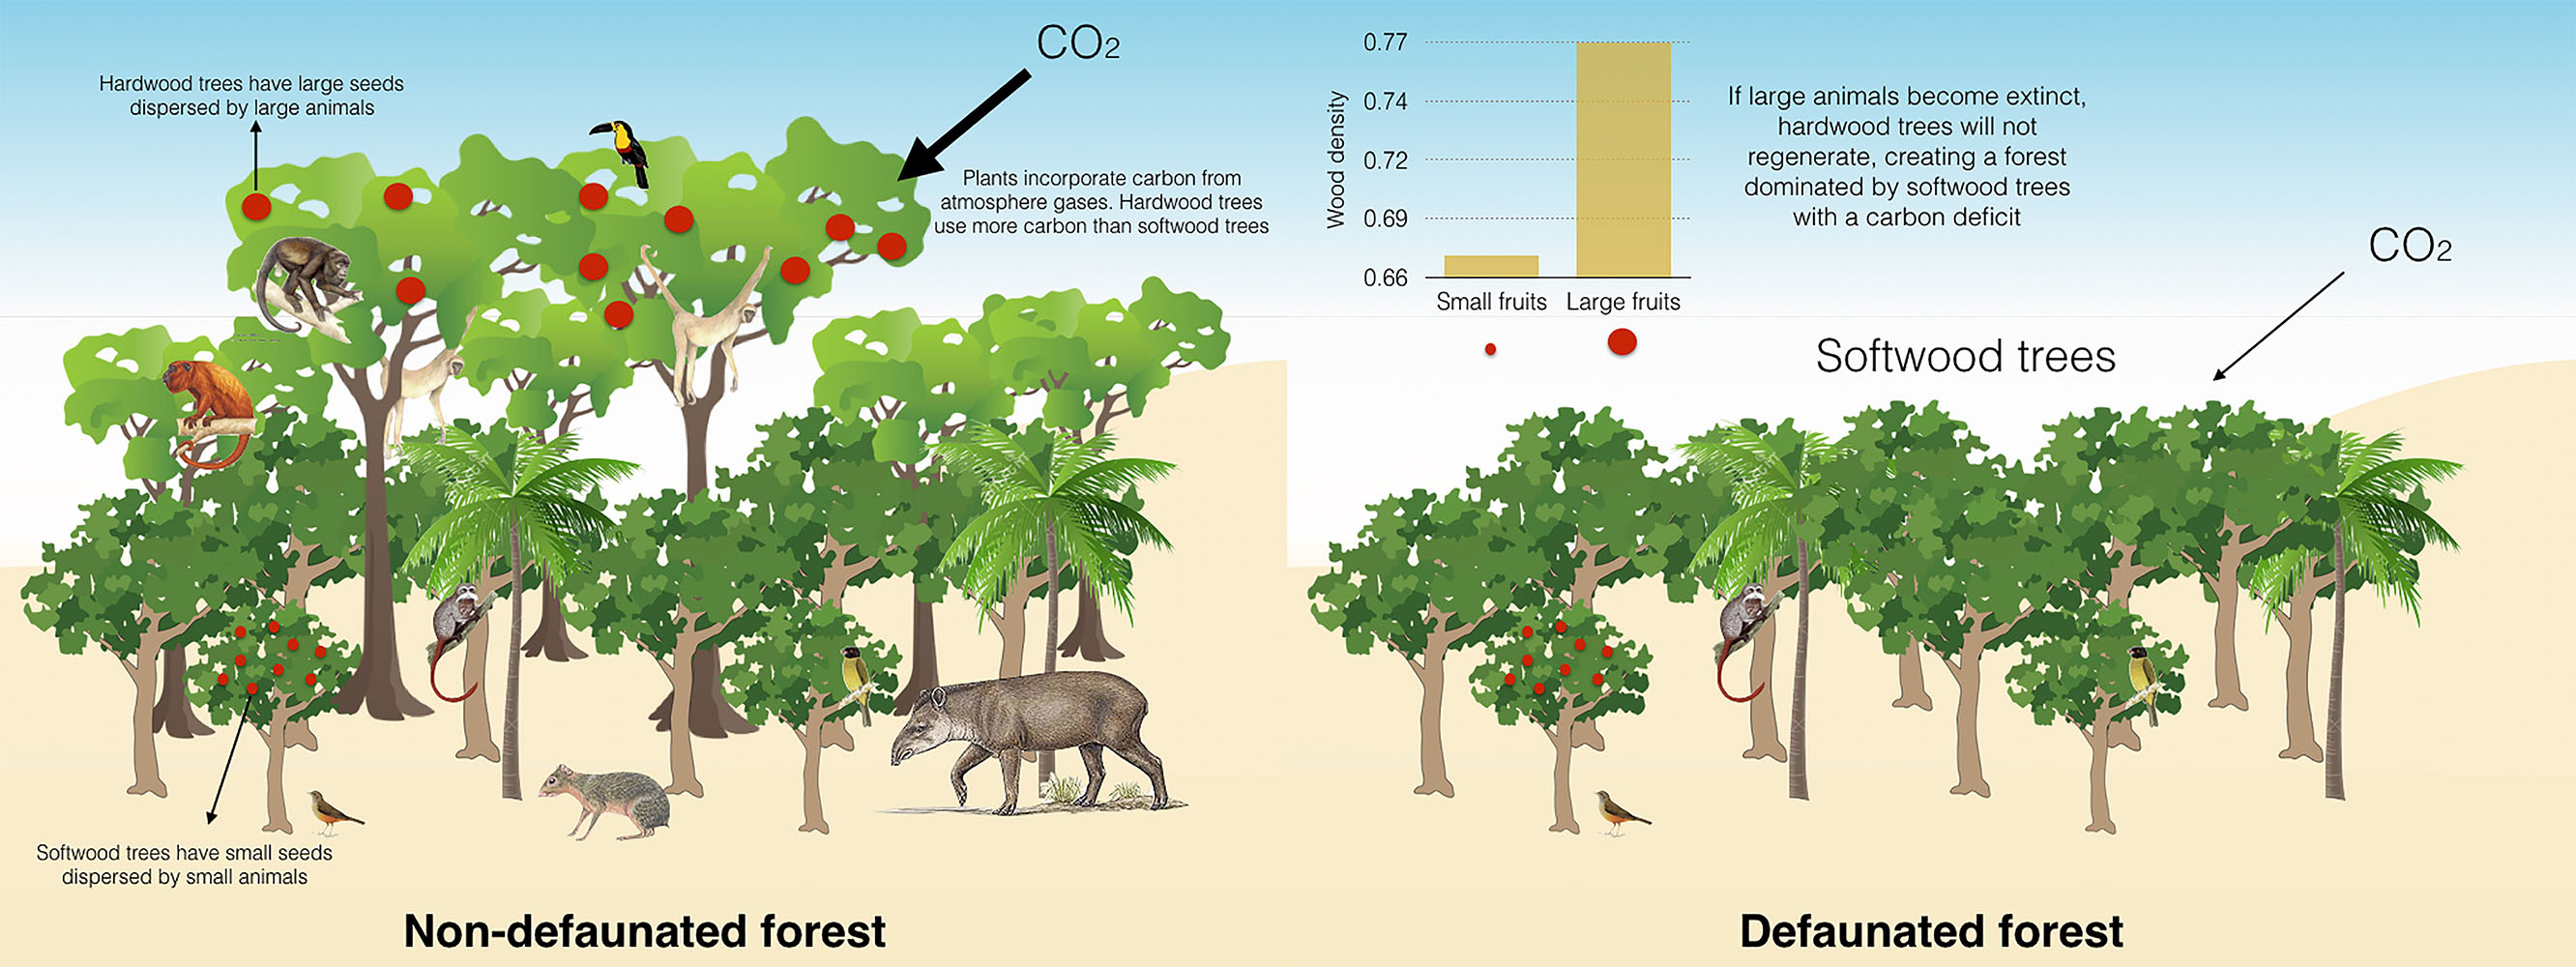 Infographic of how removal of animals (“defaunation”) affects carbon stocks in tropical forests. Credit: M. Galetti.